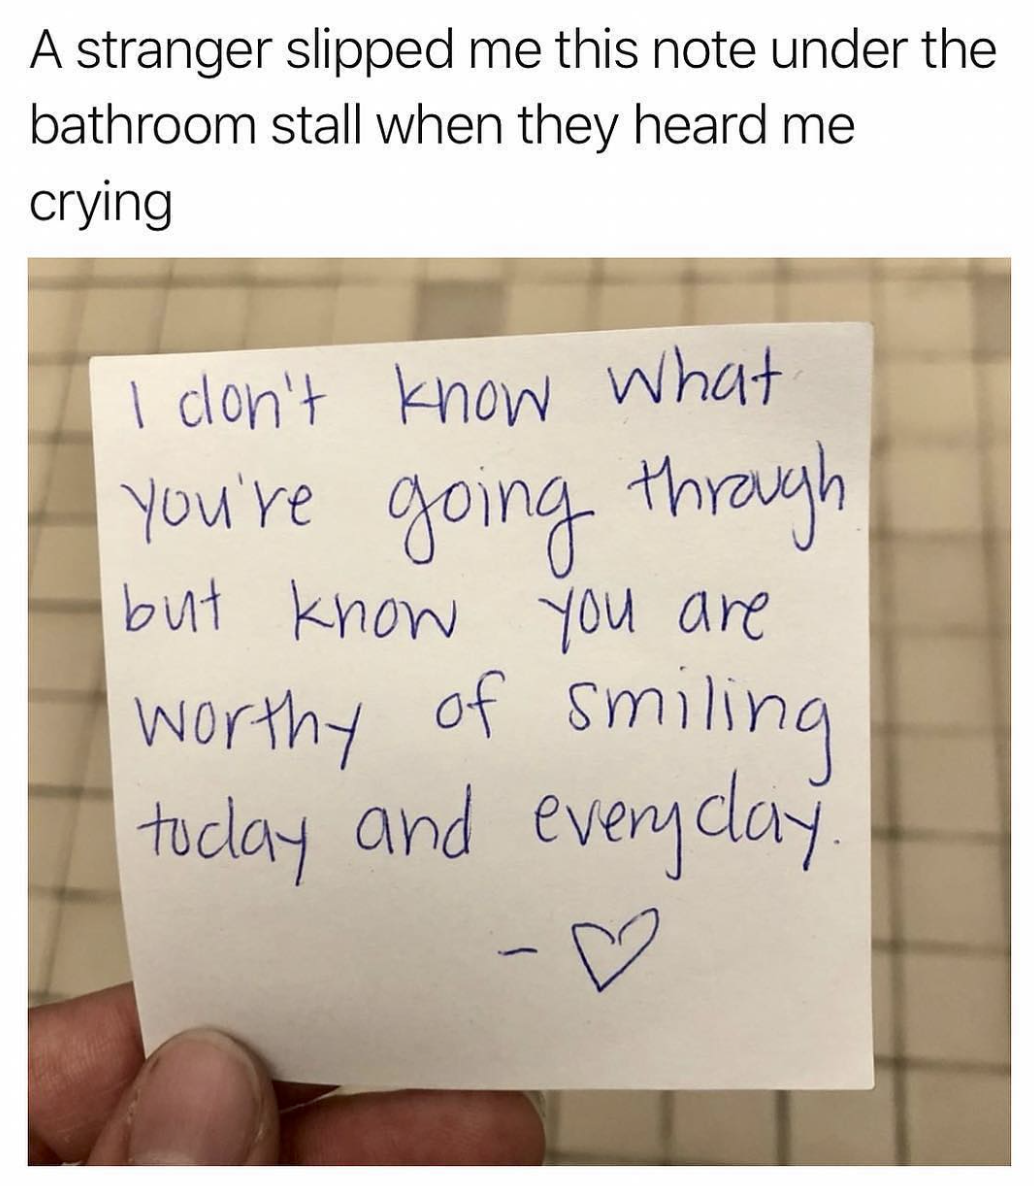 handwriting - A stranger slipped me this note under the bathroom stall when they heard me crying I don't know what you're going through but know you are worthy of smiling today and everyday.